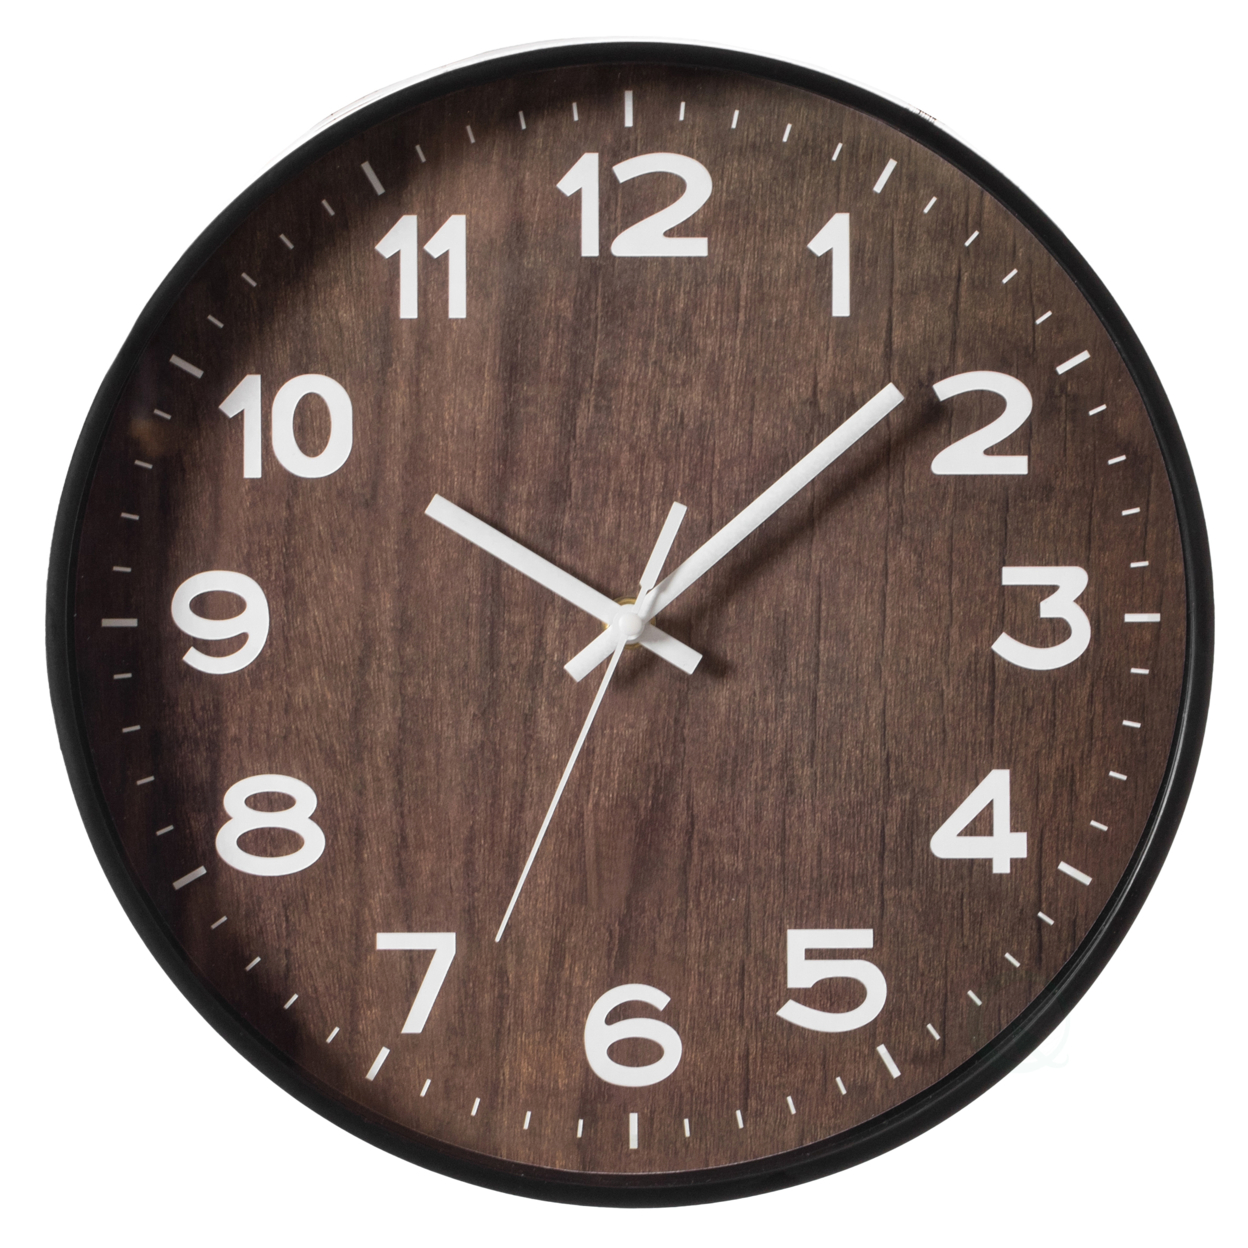 Decorative Modern Round Wood- Looking Plastic Wall Clock For Living Room, Kitchen, Or Dining Room - Brown